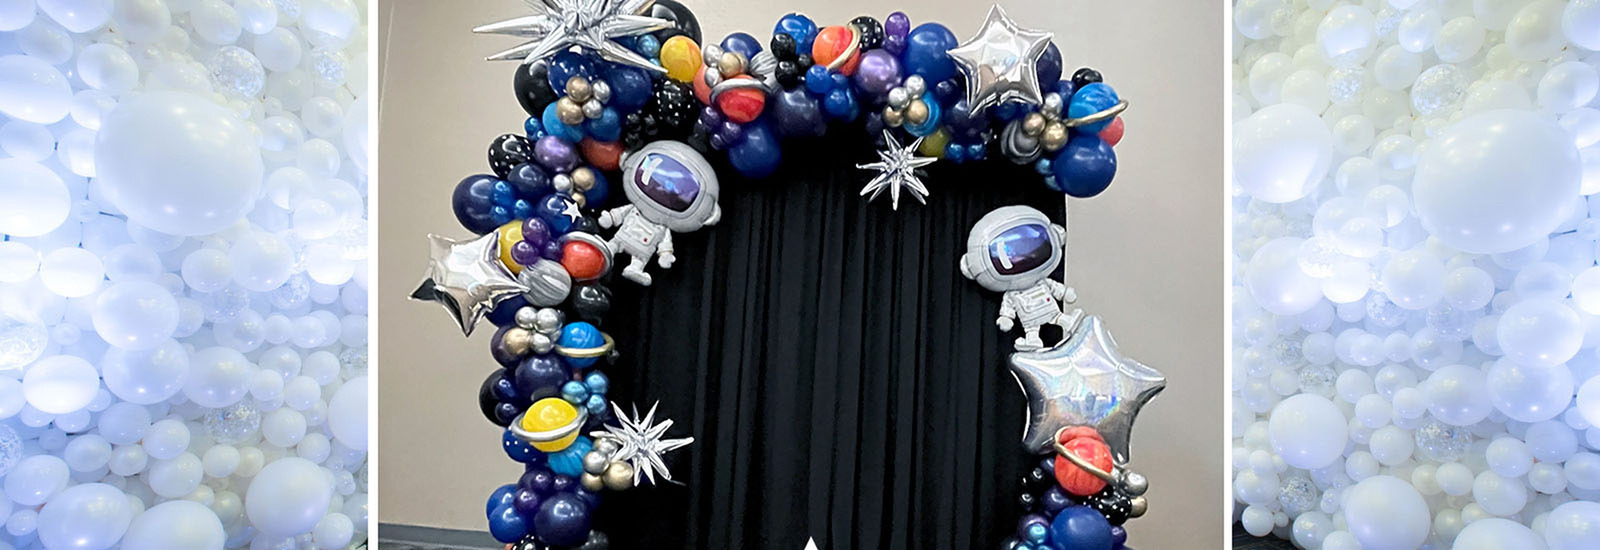 Space themed Astronaut Balloon Arch Garland with planets, stars and rings and Backdrop  at KSC Cape Canaveral by Blank Canvas Event Decor 